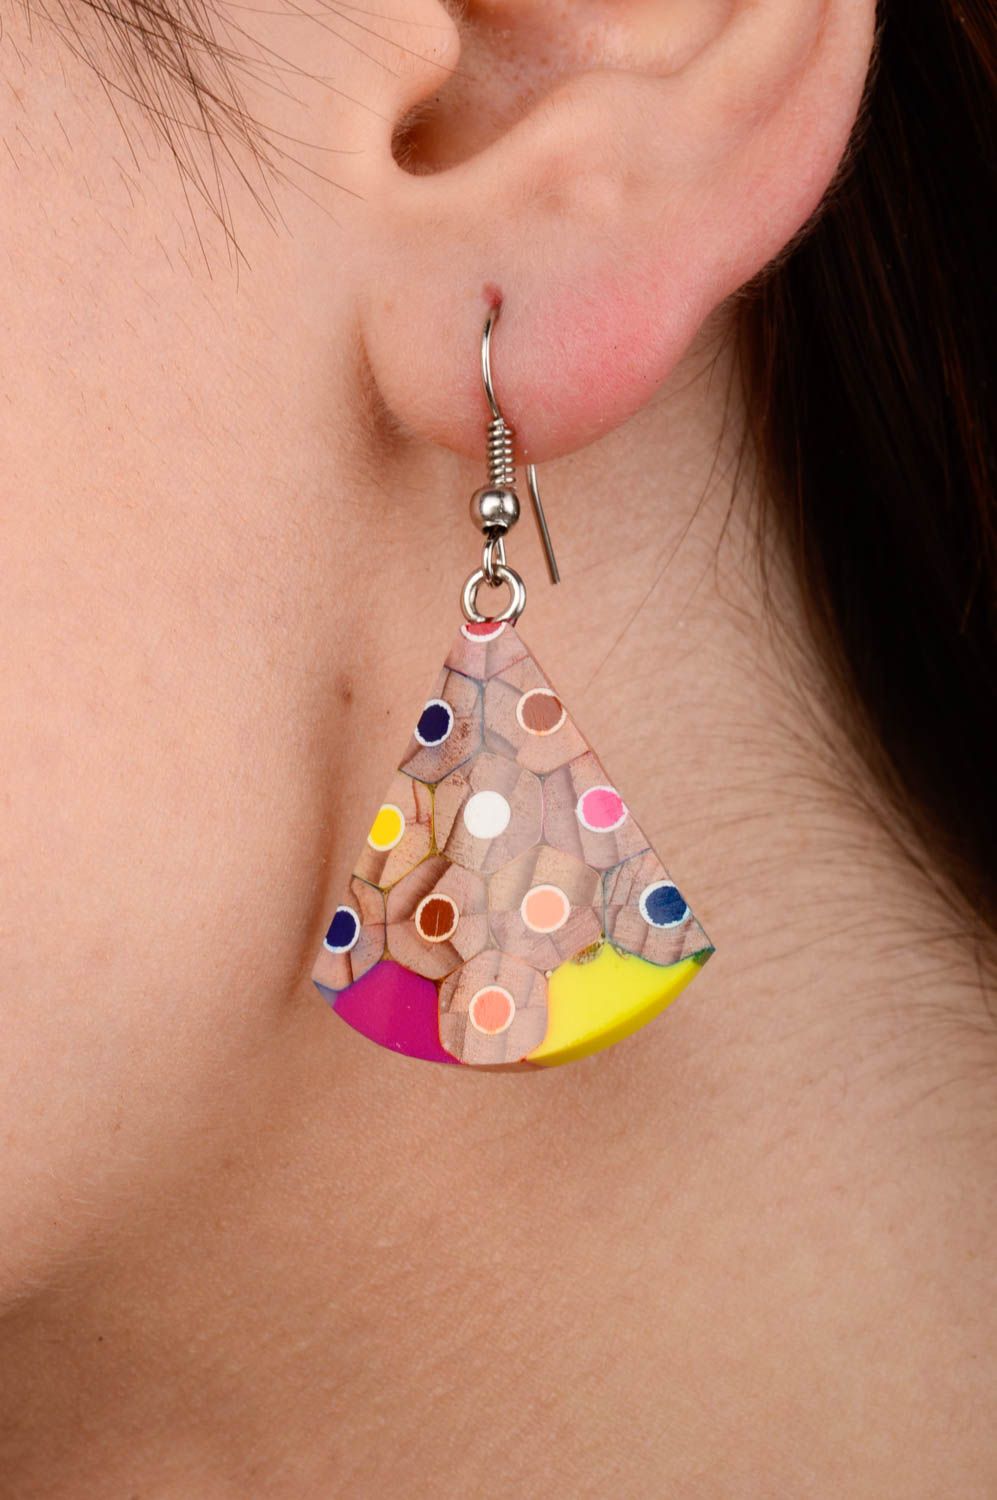 Homemade jewelry fashion earrings for girls designer accessories gifts for her photo 2